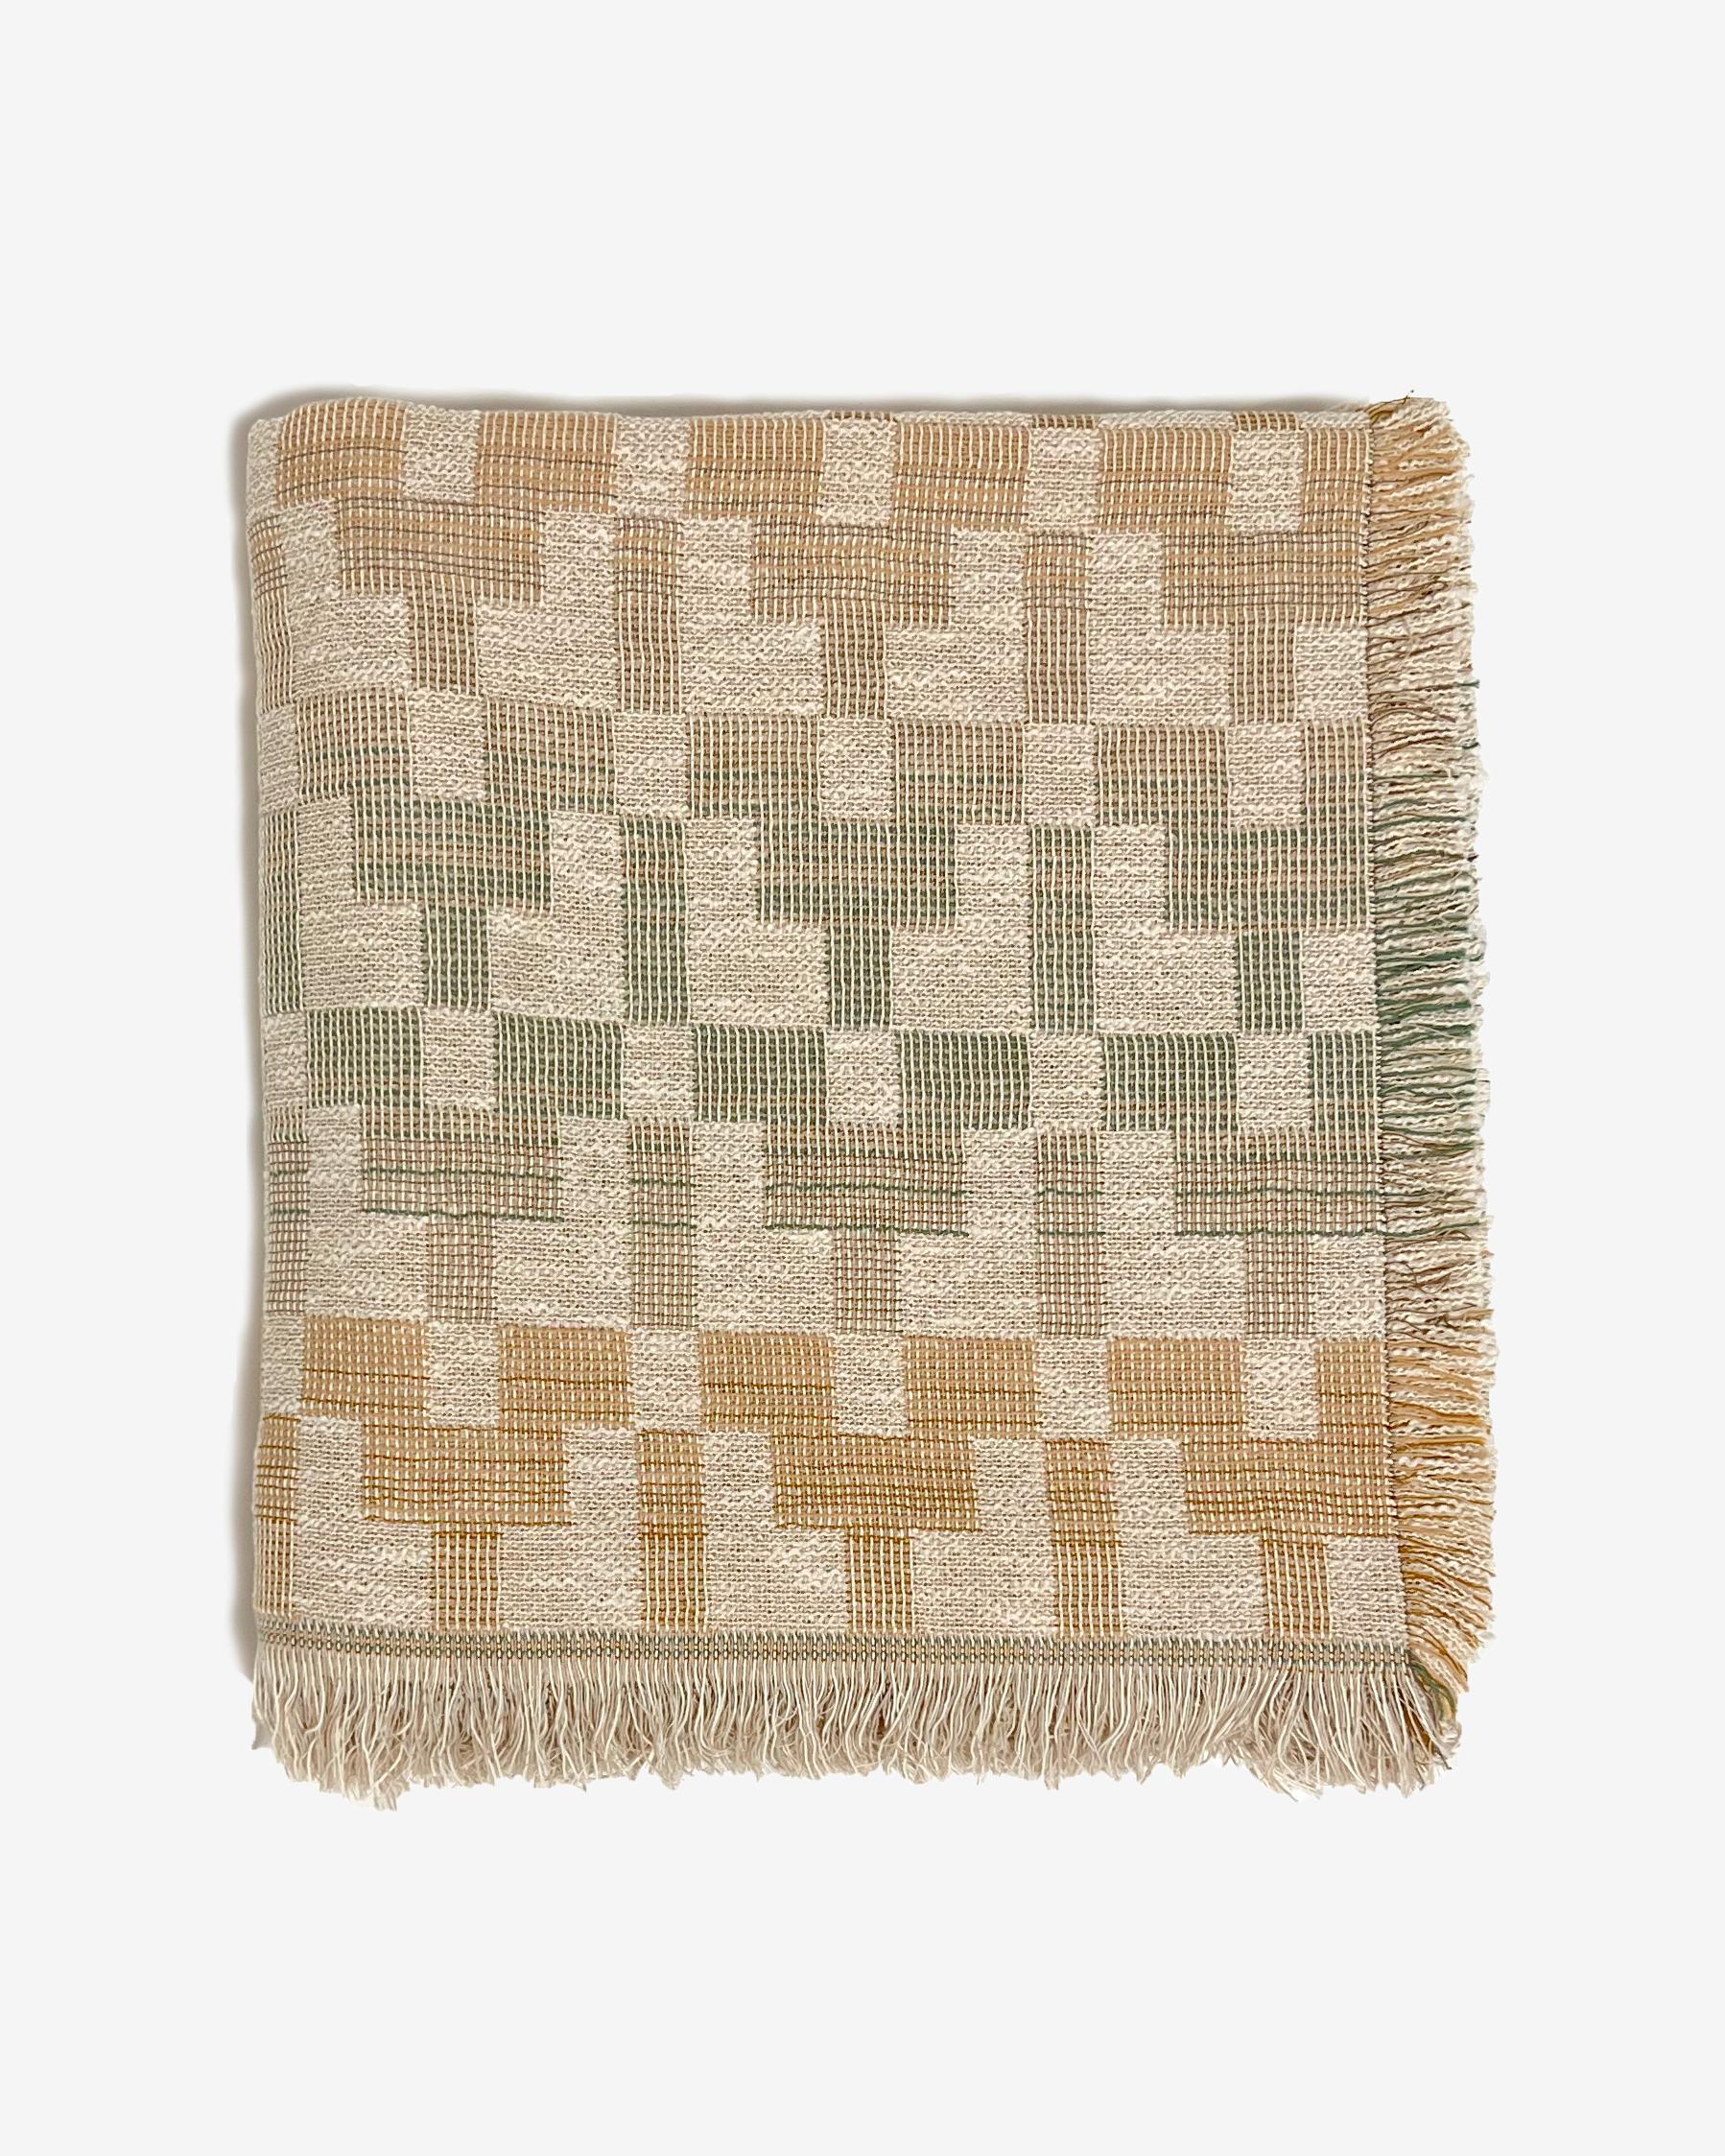 The 'Esme' bedspread is designed by Folk Textiles—a LA based brand dedicated to thoughtful living. This textile is woven in the UK using sustainably-dyed organic cotton from Italy. 

The 'Esme' pattern in particular is inspired by the ceremonial